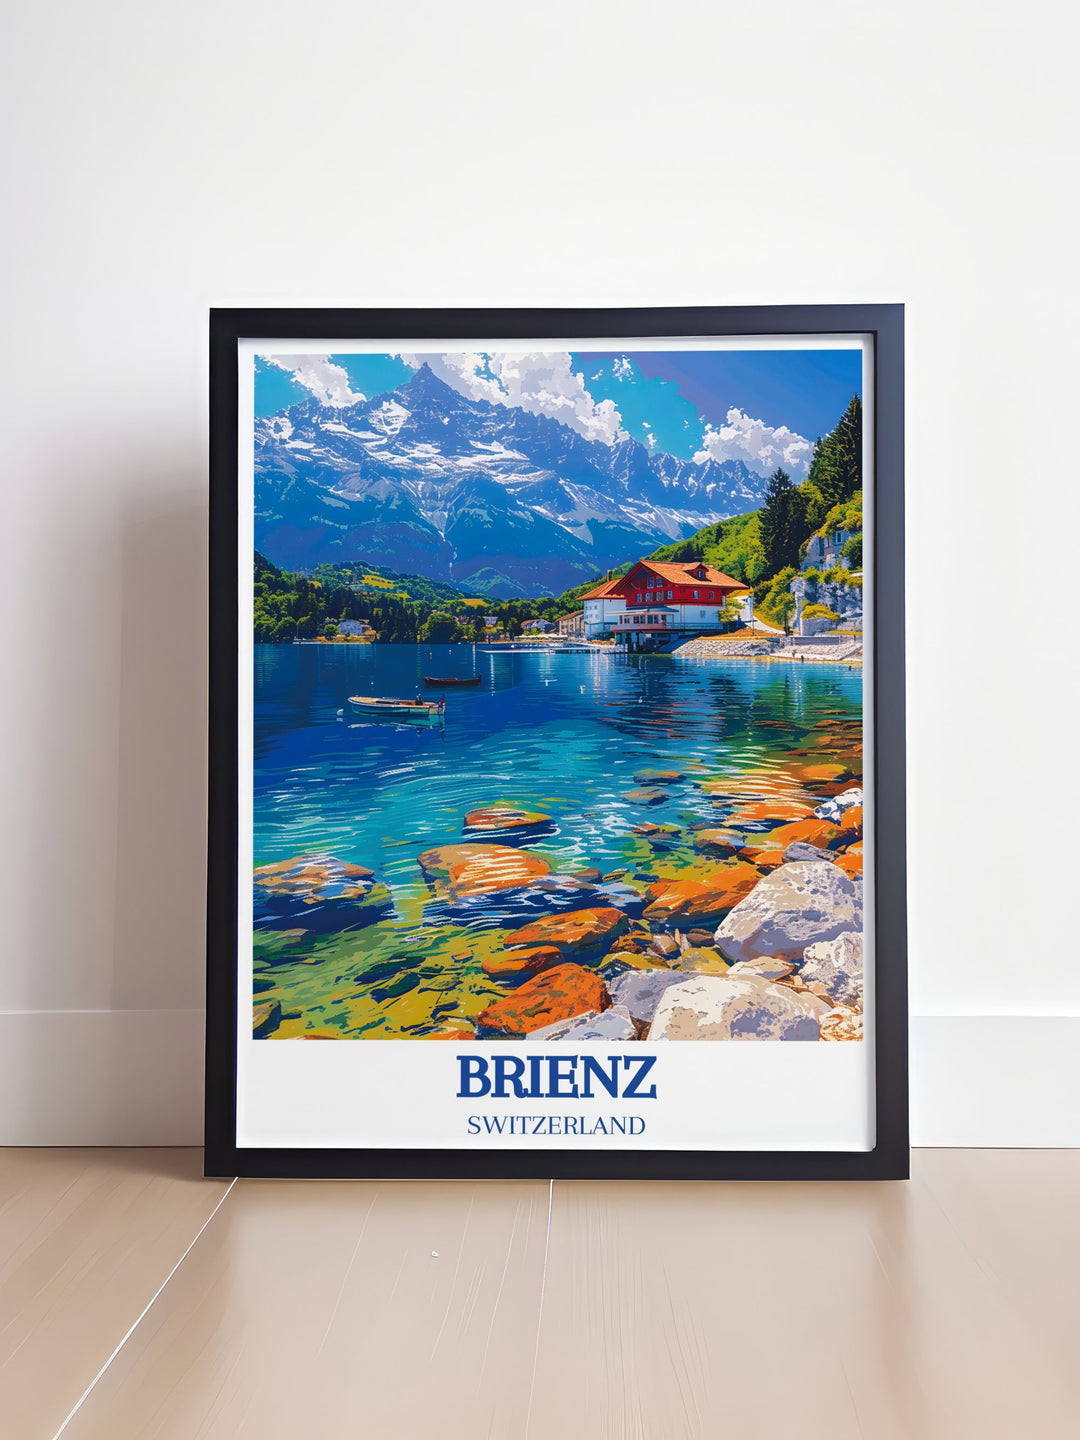 Vintage travel print of Lake Brienz, Brienzer Rothorn with a beautiful Swiss Alps background. Retro travel poster capturing the essence of Switzerlands scenic beauty. Great for framing and displaying.